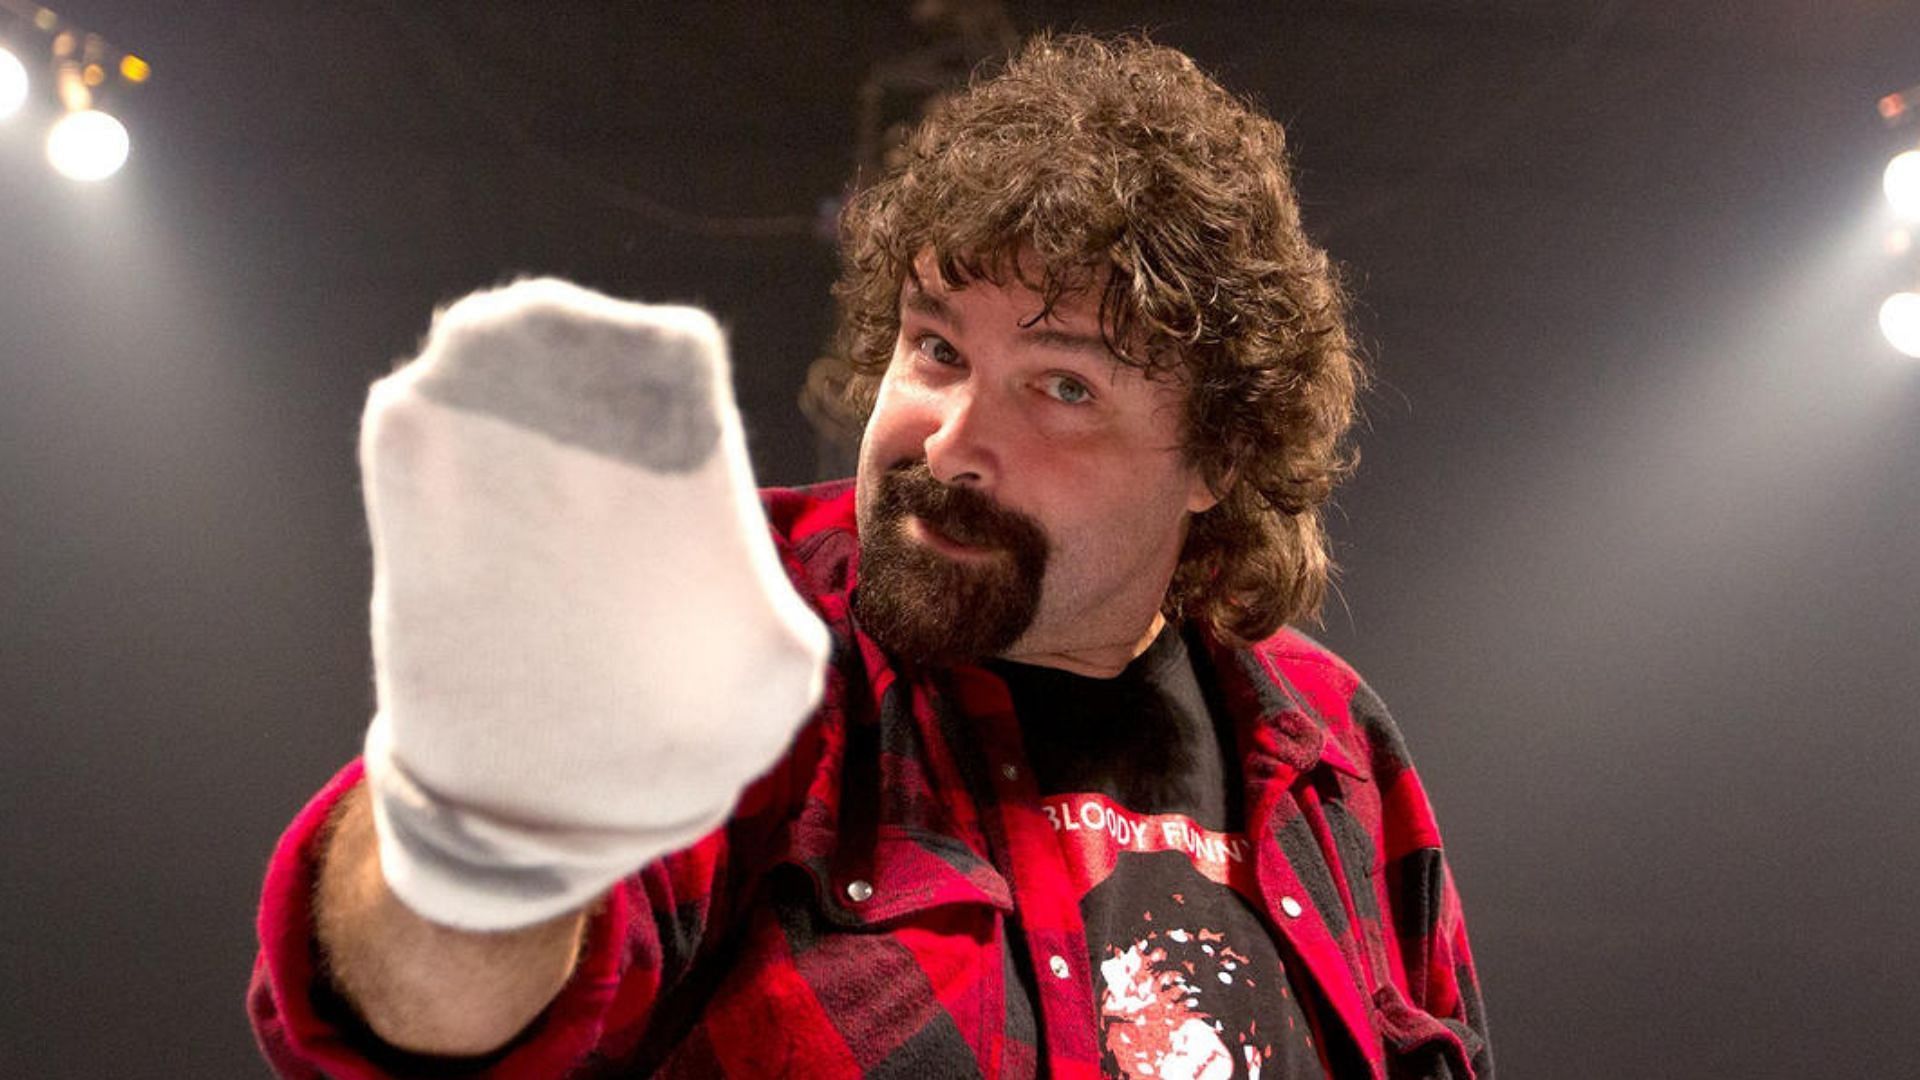 Foley is a legend of the wrestling business.